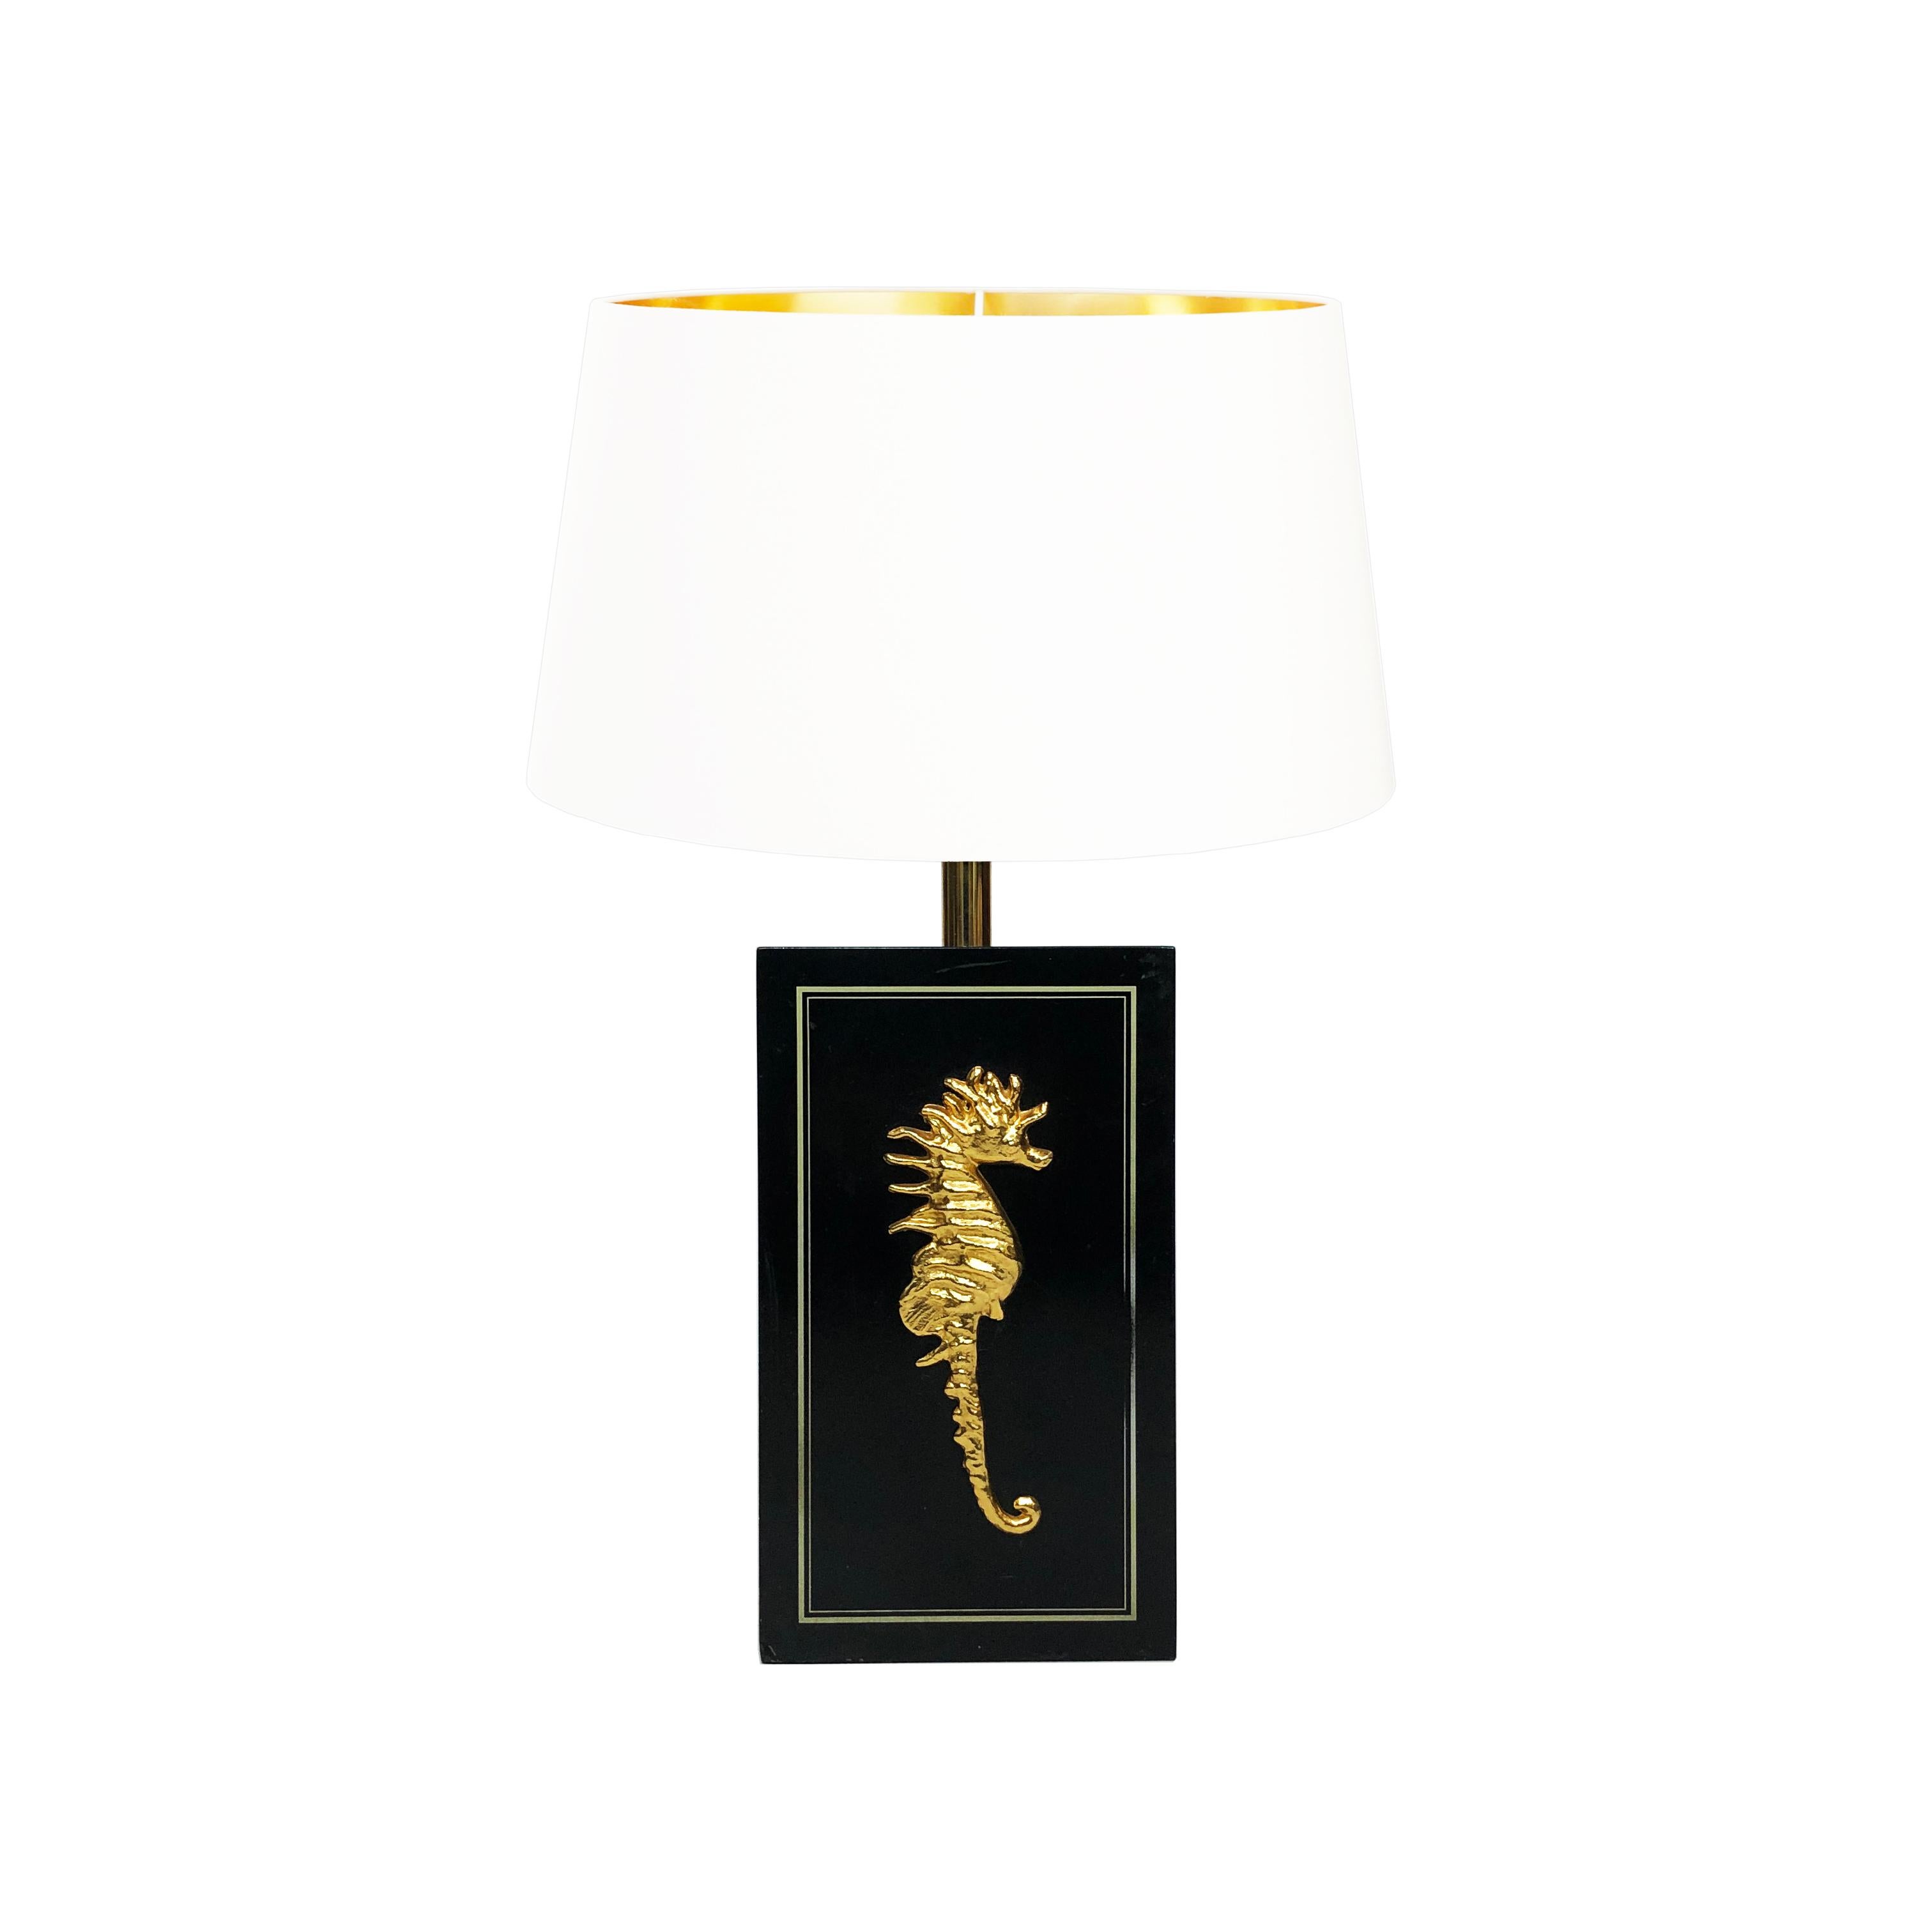 This Belgian table lamp in black and gold depicts the side profile of a seahorse, with an intricate brass plated hippocampus. This is mounted to a rectangular lacquered wood base, from which protrudes the bulb holder. There is a thin gold trim